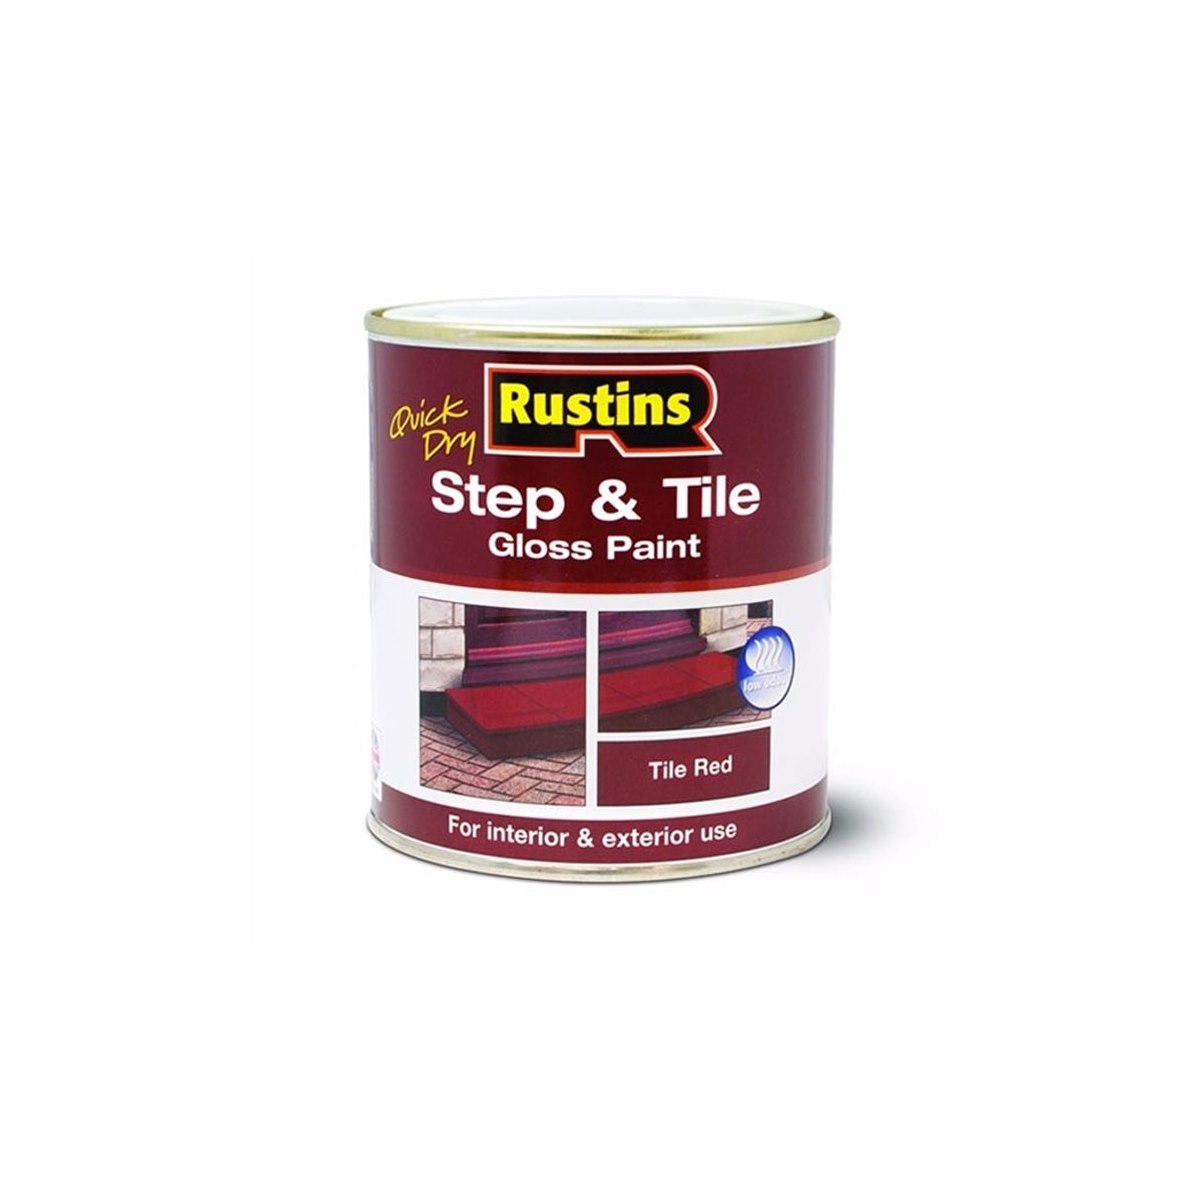 Rustins Quick Dry Step and Tile Gloss Paint Red 2.5 Litre